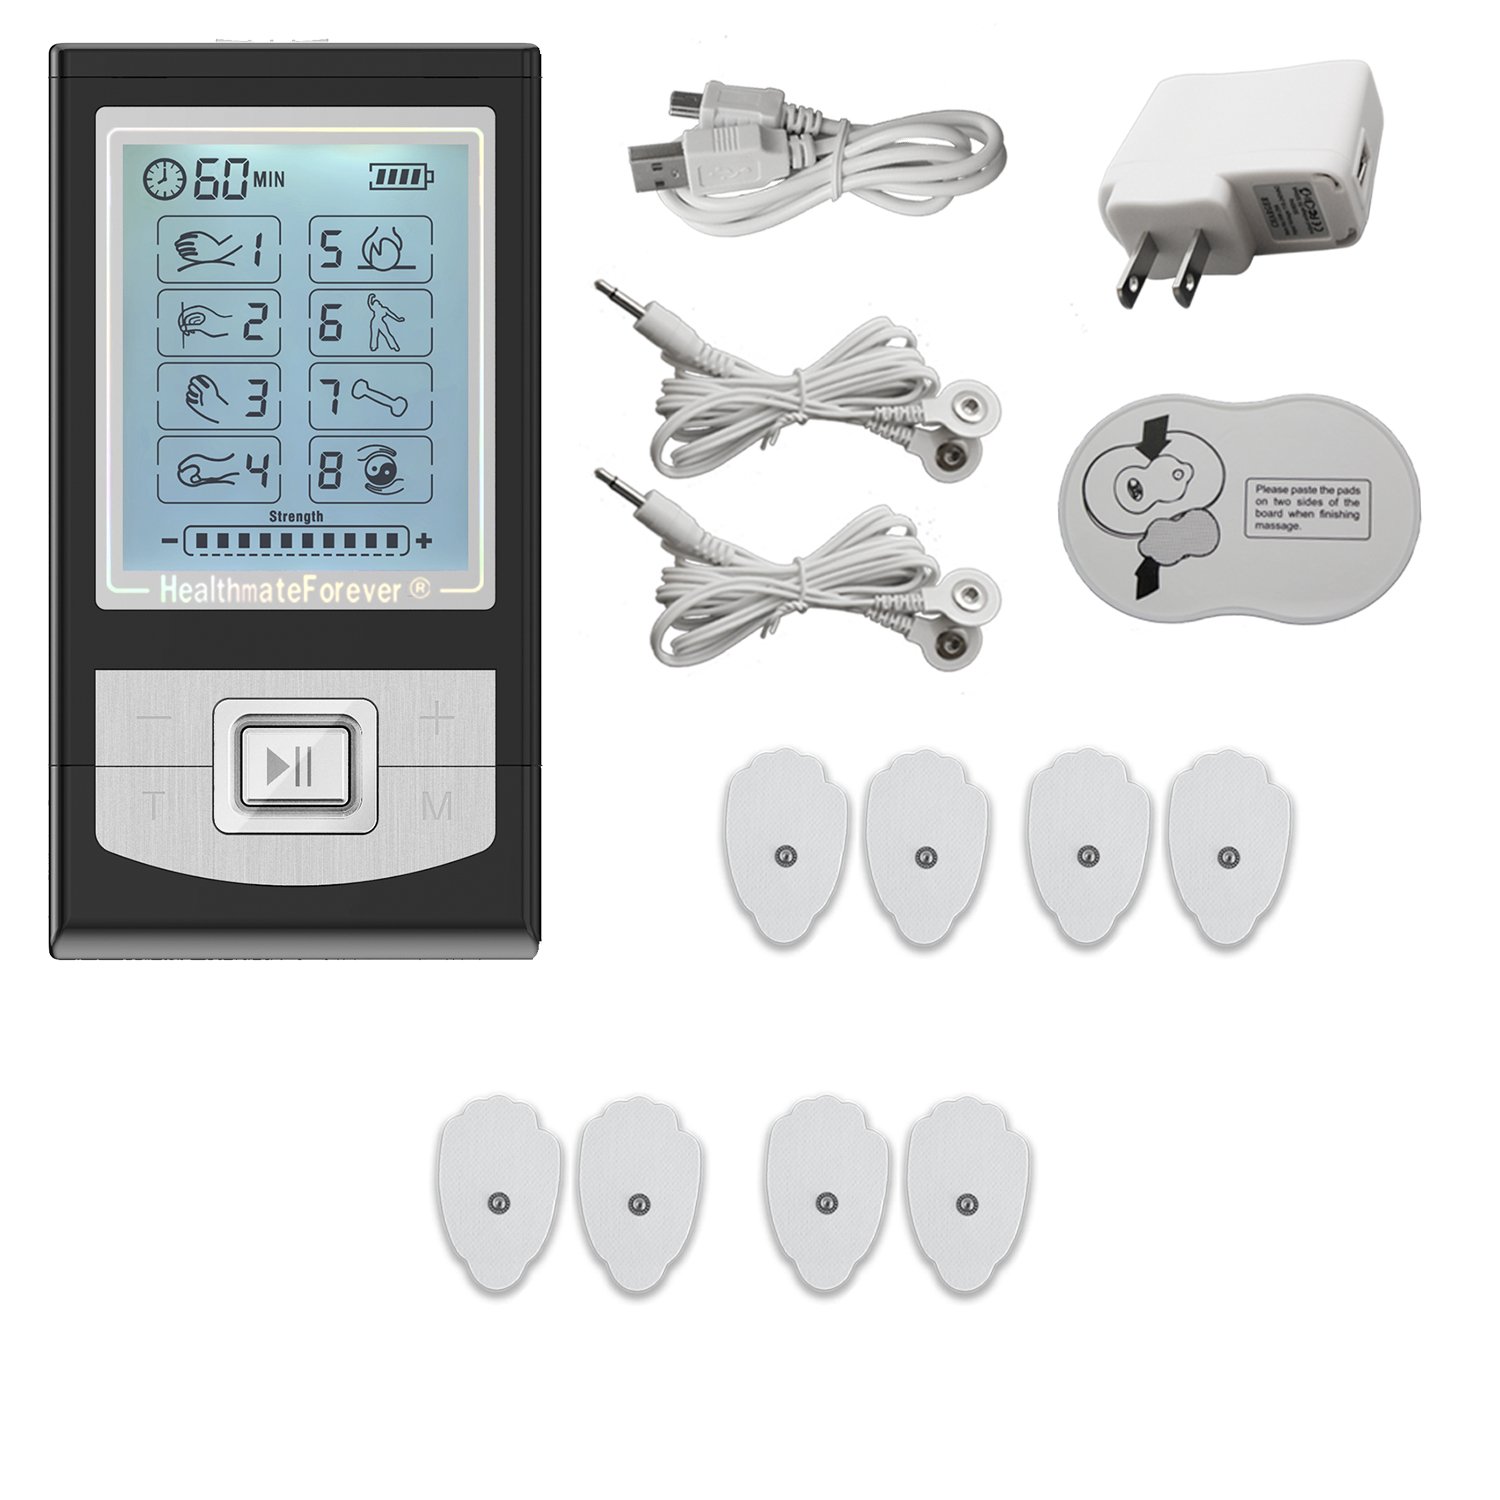 ipulse tens and electric muscle stimulator instructions